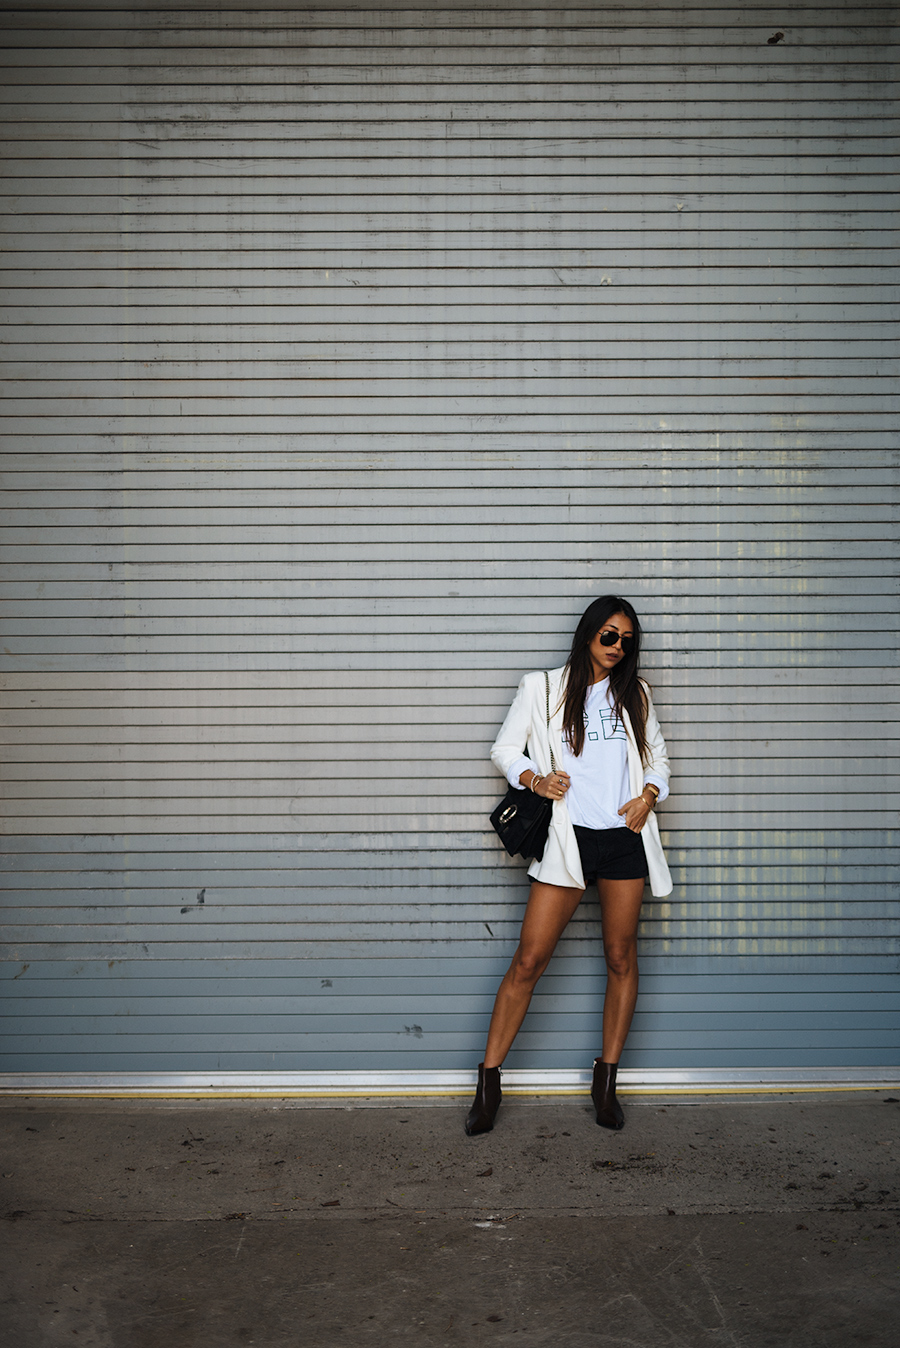 white blazer outfit ideas black shorts sweater sweatshirt how to wear acne pistol boots pointed boots best boots not your standard blogger style blog kayla seah pretty hair girl black denim shorts one teaspoon white blazer, p.e nation white sweatshirt and gucci dinoysus suede bag large